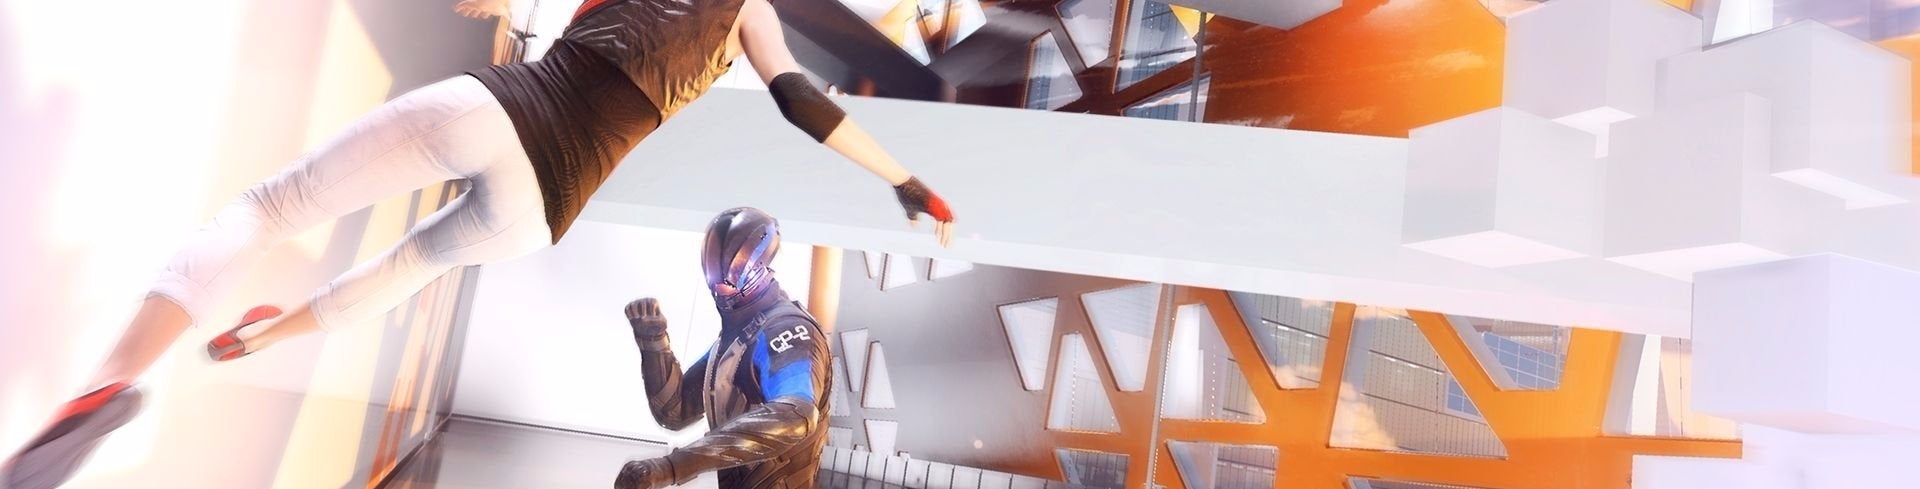 Image for Watch: The cops in Mirror's Edge are extremely bad at fighting crime